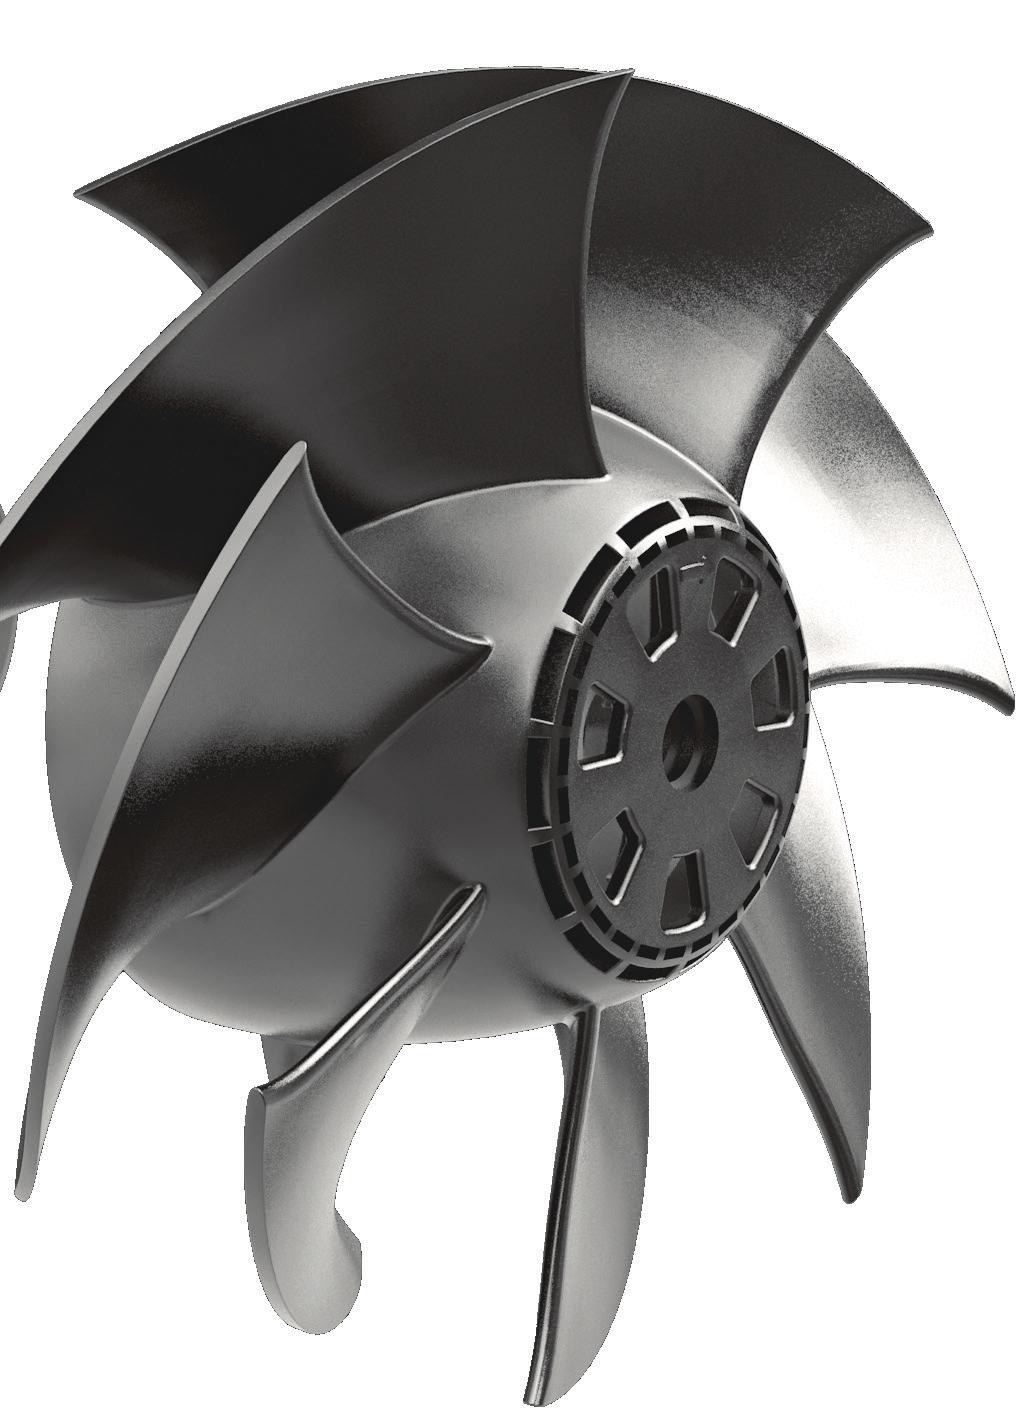 Double balanced fan blades Global Air Supplies UK Partners of Global Air Supplies are proud to be Systemair global partners selling and developing ventilation and